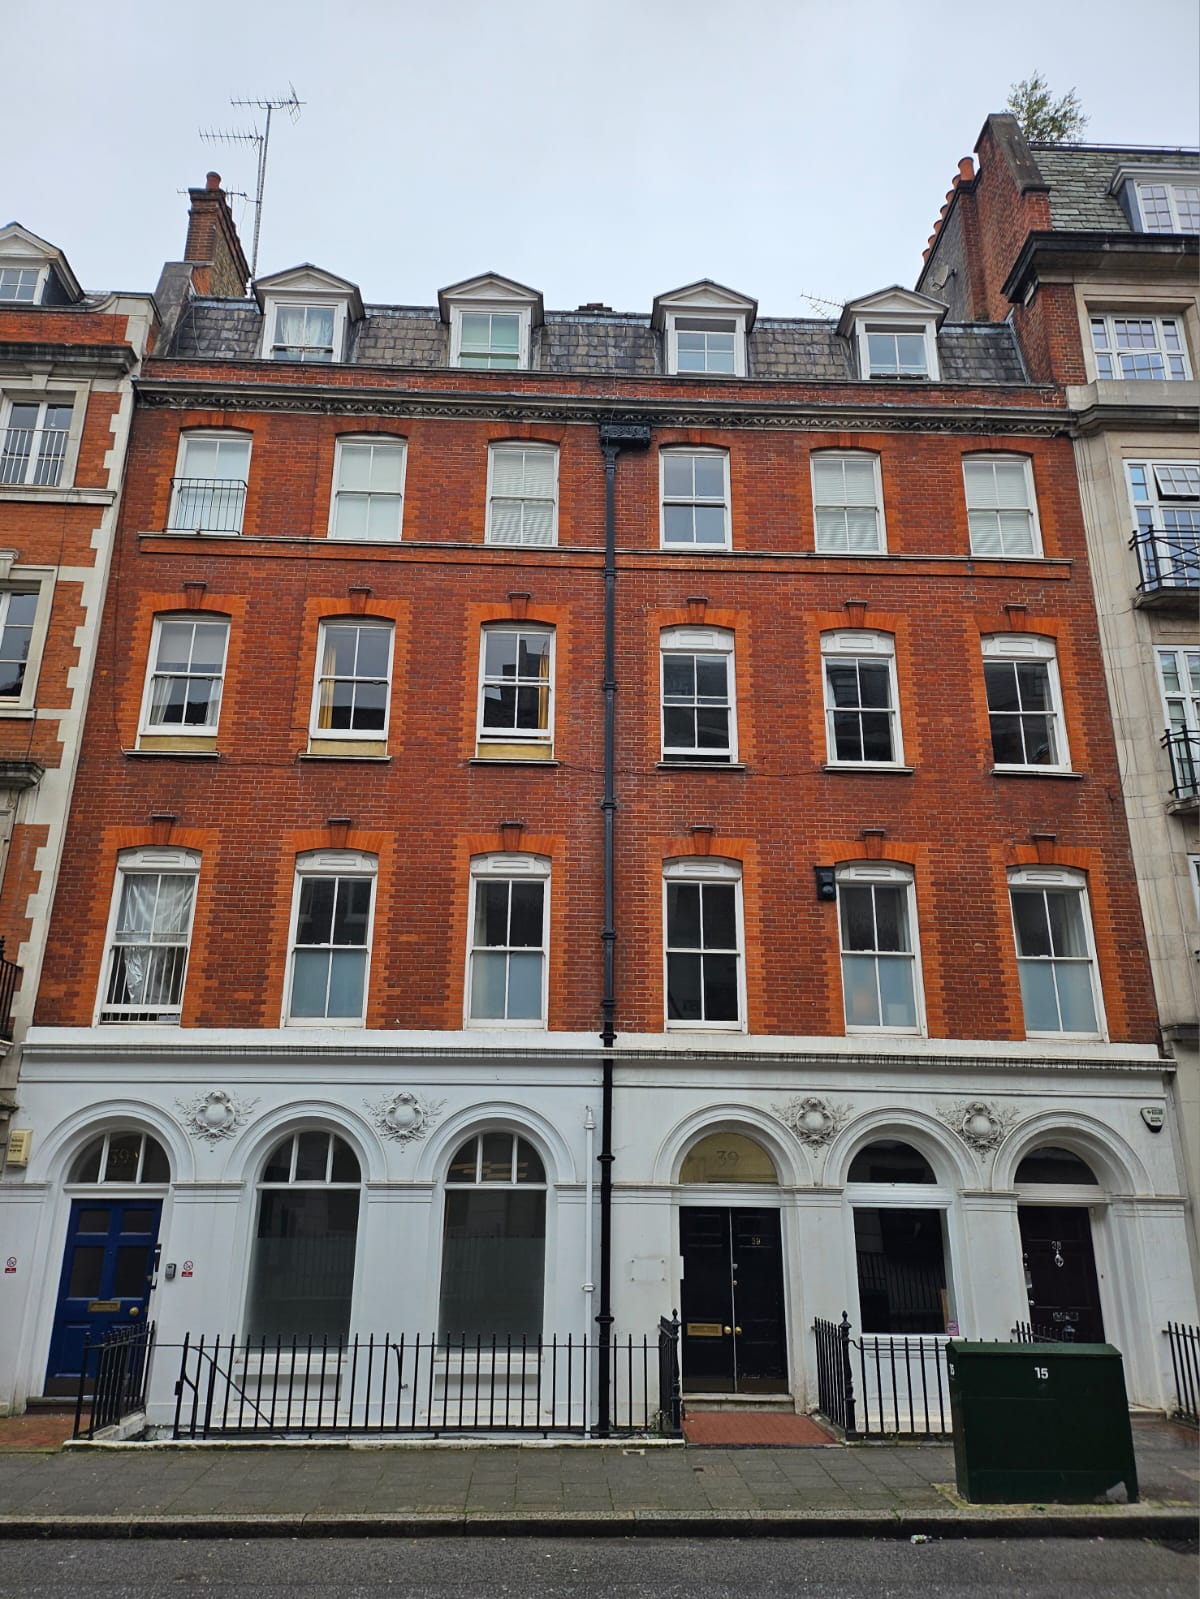 39 Welbeck Street. a typical London townhouses, with four stories and attics, rectangular Georgian windows and a plastered ground floor and brick above.